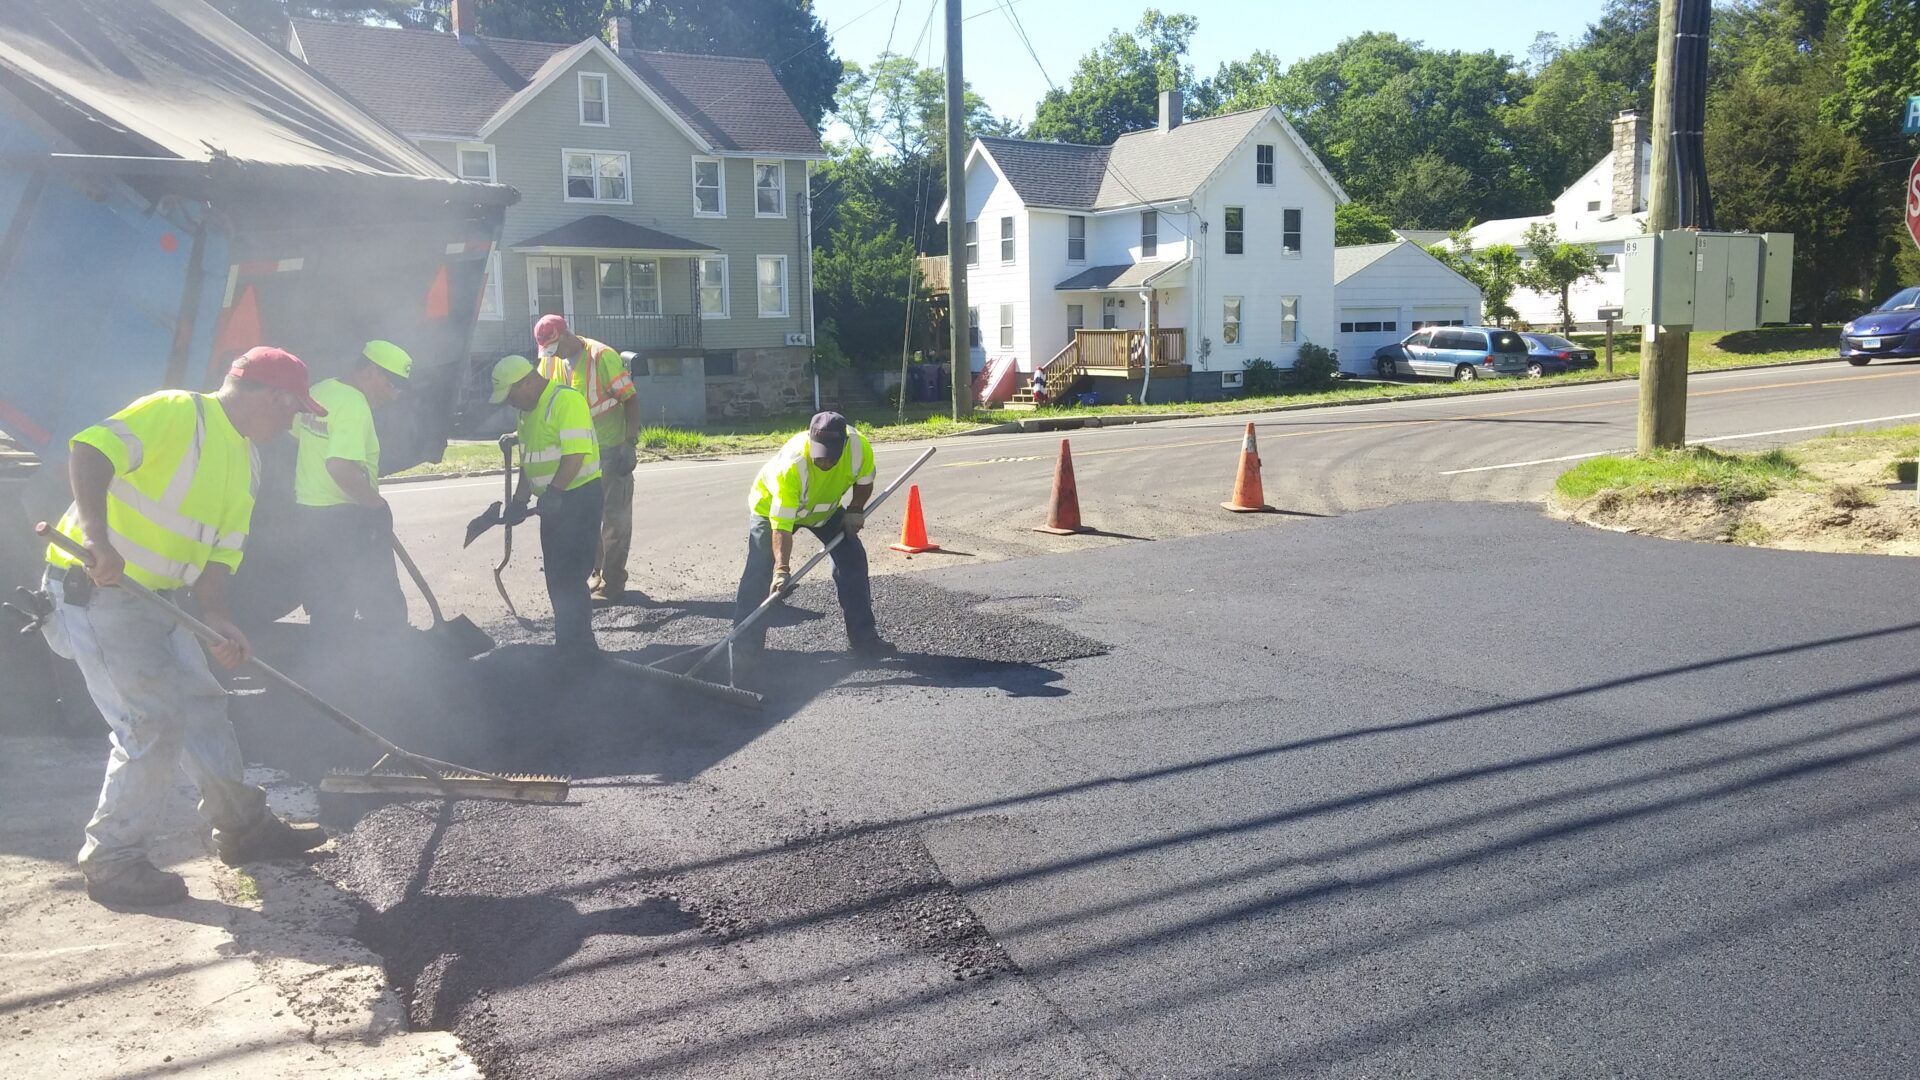 Two men working on a road with cones around them.